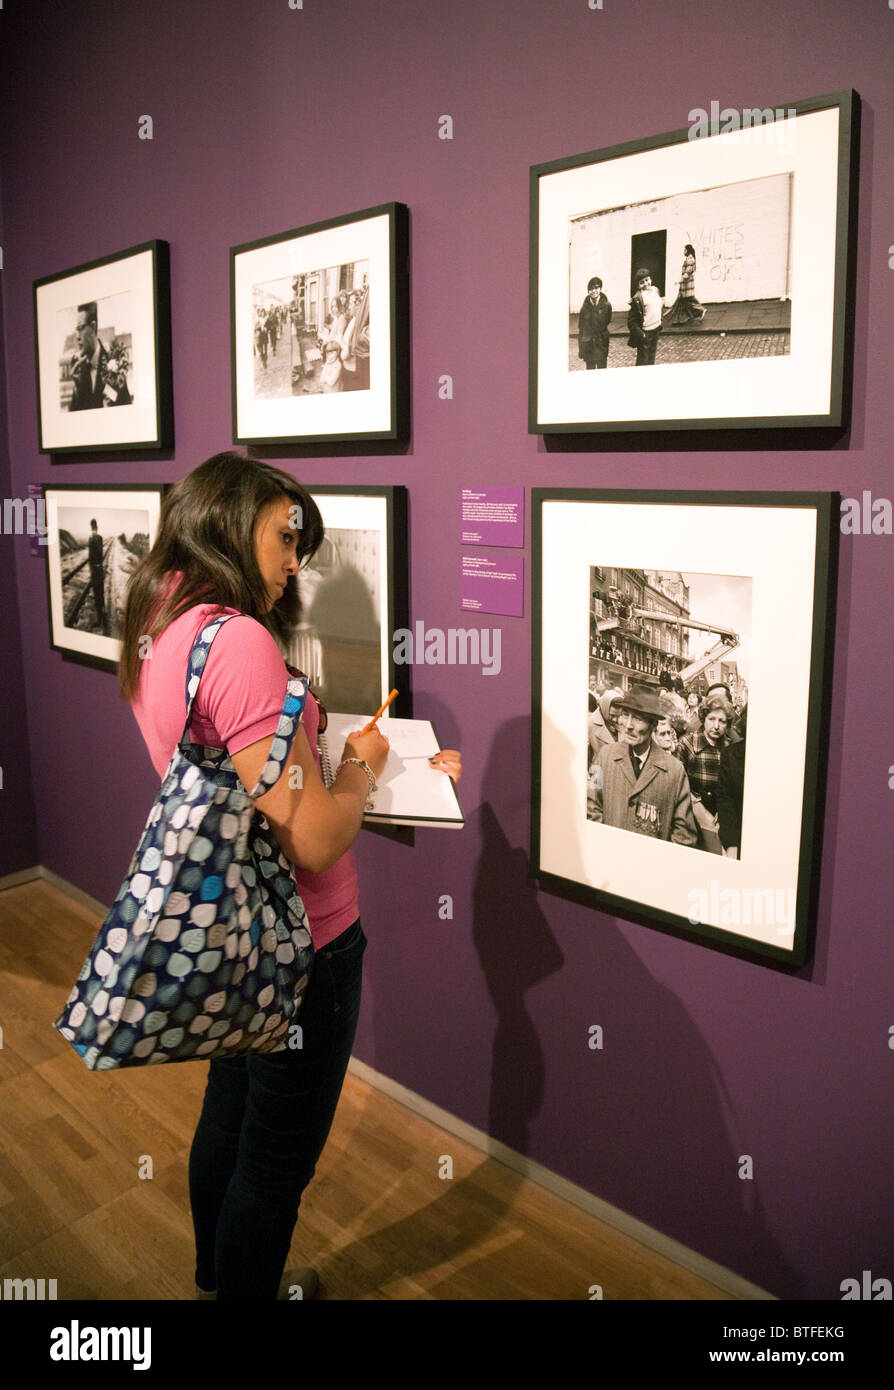 Photography A level student studying a photographic exhibition; the Victoria and Albert Museum, London UK Stock Photo